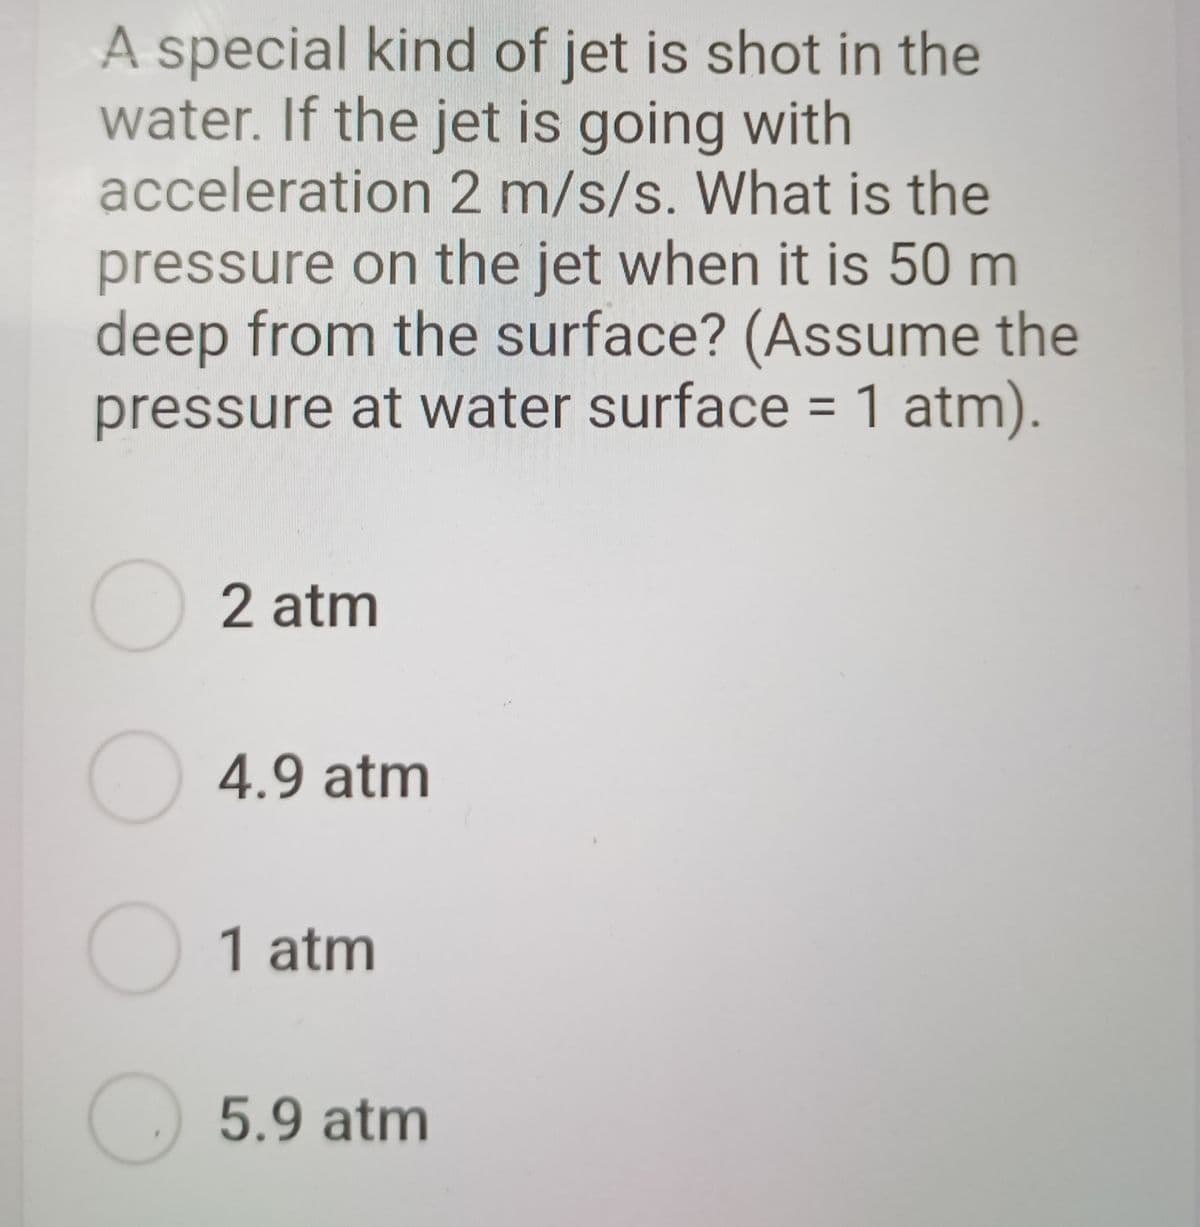 A special kind of jet is shot in the
water. If the jet is going with
acceleration 2 m/s/s. What is the
pressure on the jet when it is 50 m
deep from the surface? (Assume the
pressure at water surface = 1 atm).
O 2 atm
O 4.9 atm
1 atm
5.9atm
